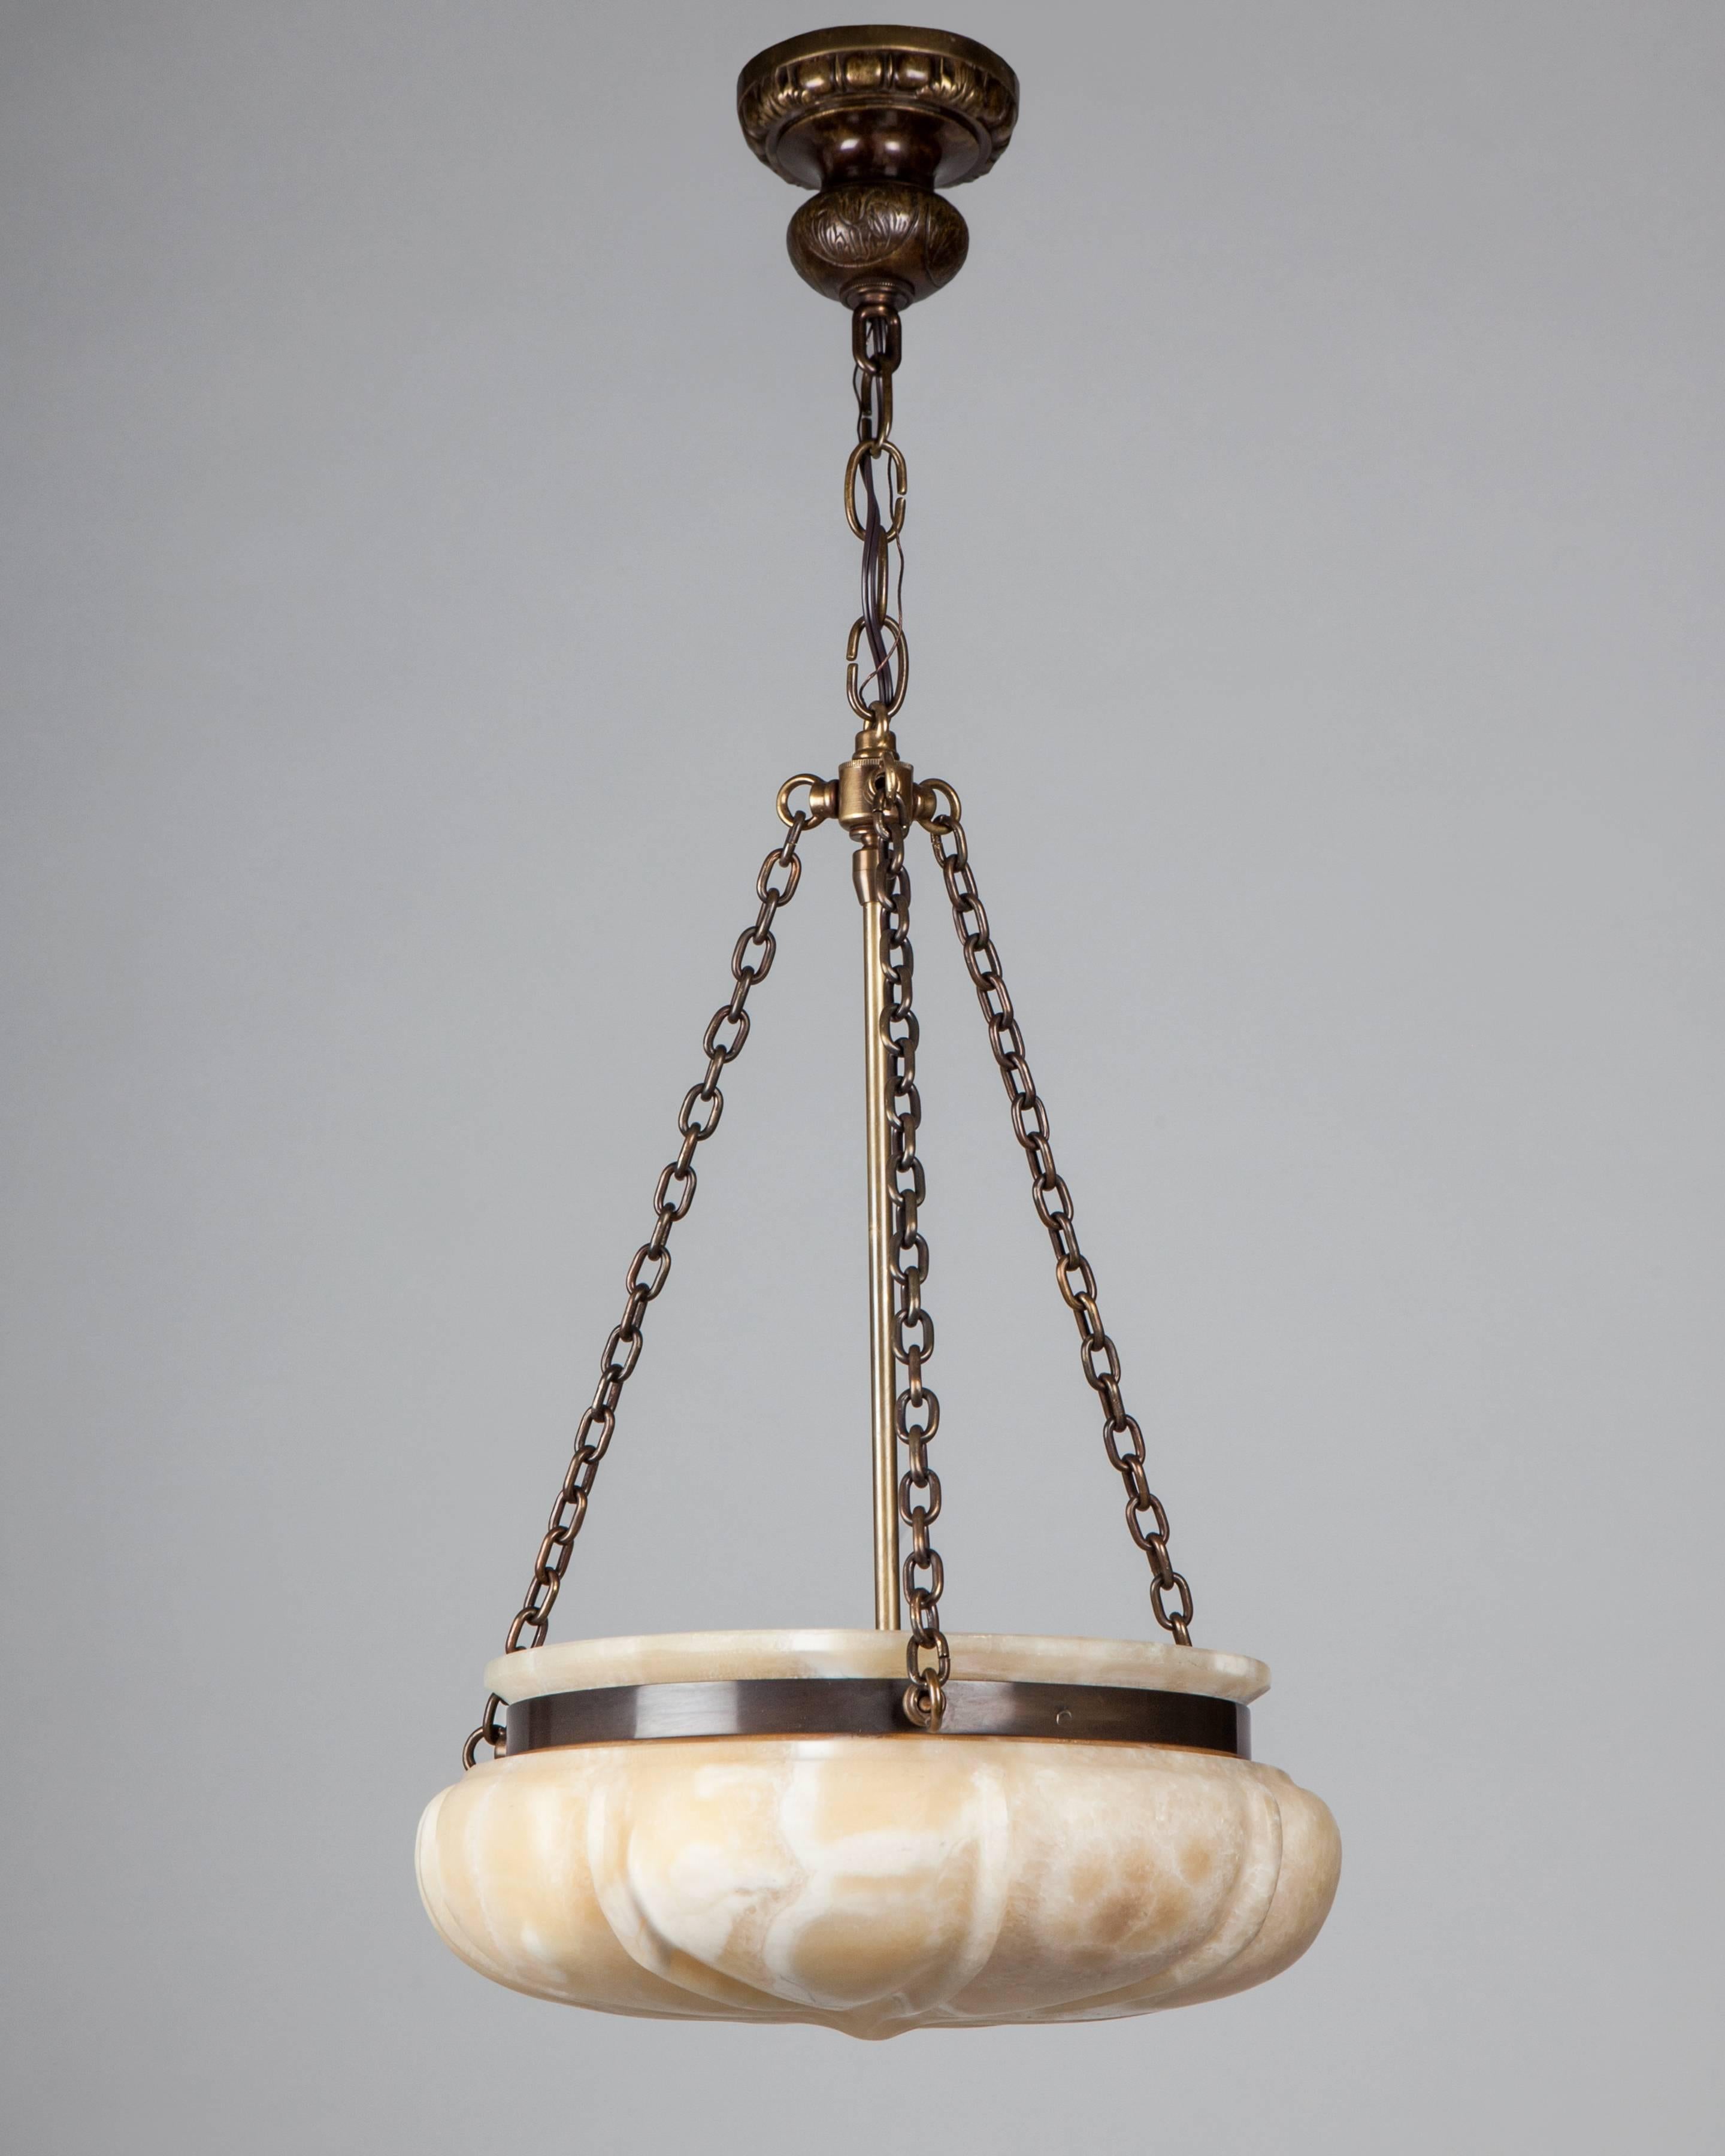 AHL4113
An inverted dome chandelier in very thick, carved alabaster with a ribbed design suspended from darkened brass hardware custom-made in our workshop. Alabaster includes natural veining, as well as the marks and scuffs of age and use inherent